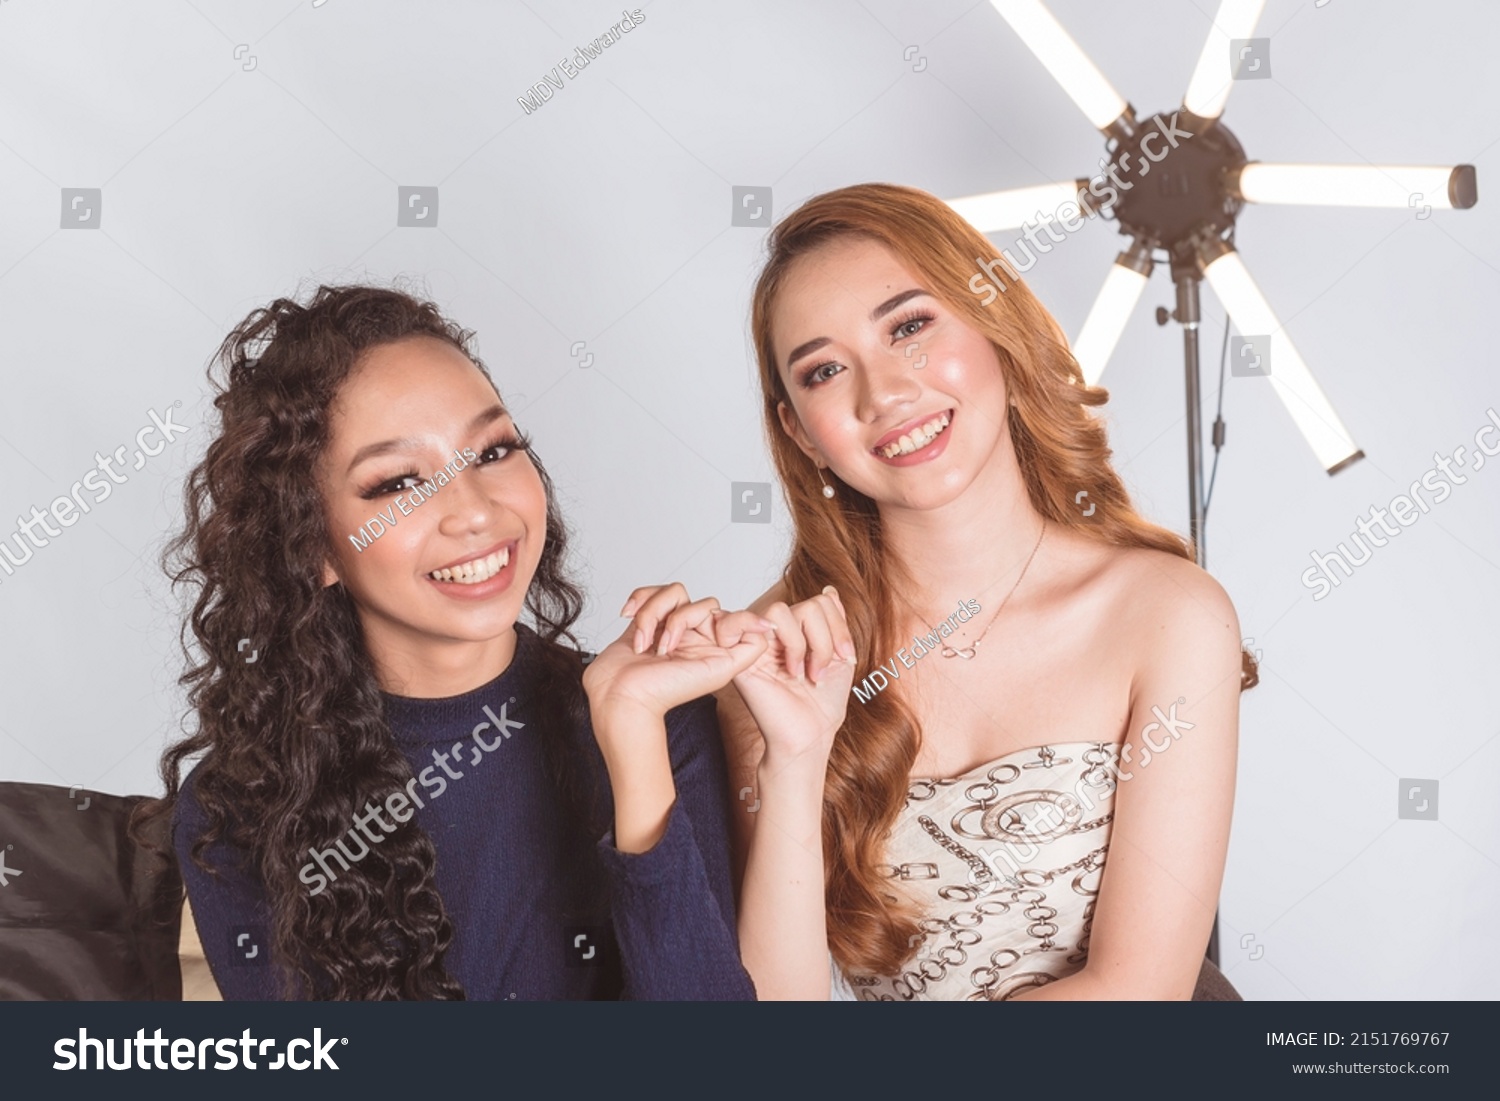 Two lovely asian ladies making a pinky swear. Making a lighthearted pact. 2 models on location at a photographic studio. #2151769767